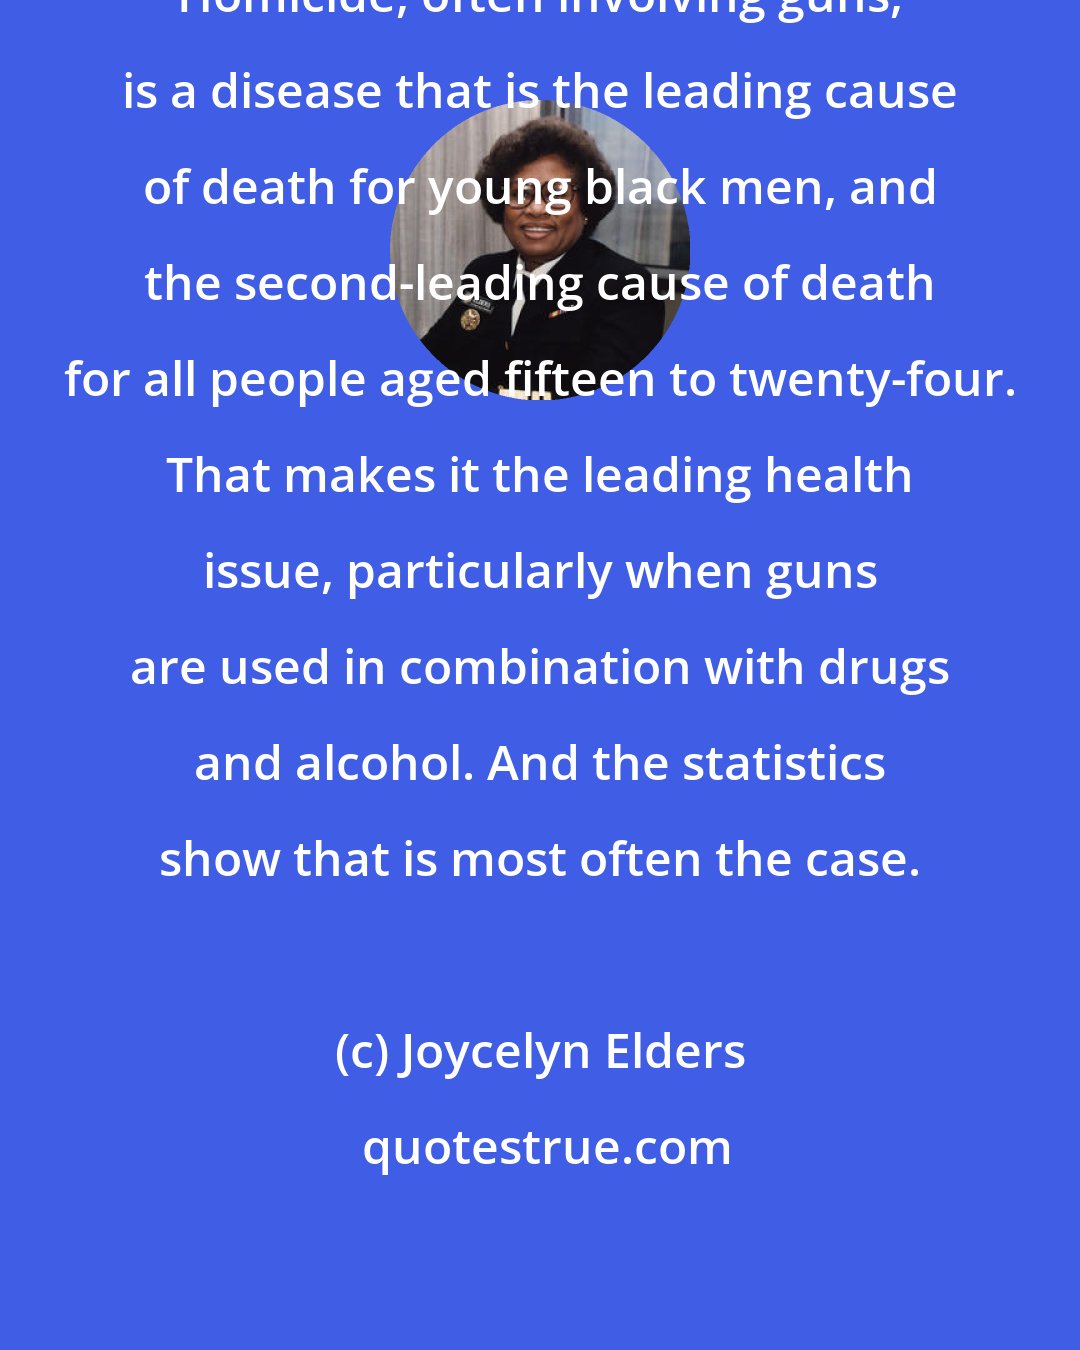 Joycelyn Elders: Homicide, often involving guns, is a disease that is the leading cause of death for young black men, and the second-leading cause of death for all people aged fifteen to twenty-four. That makes it the leading health issue, particularly when guns are used in combination with drugs and alcohol. And the statistics show that is most often the case.